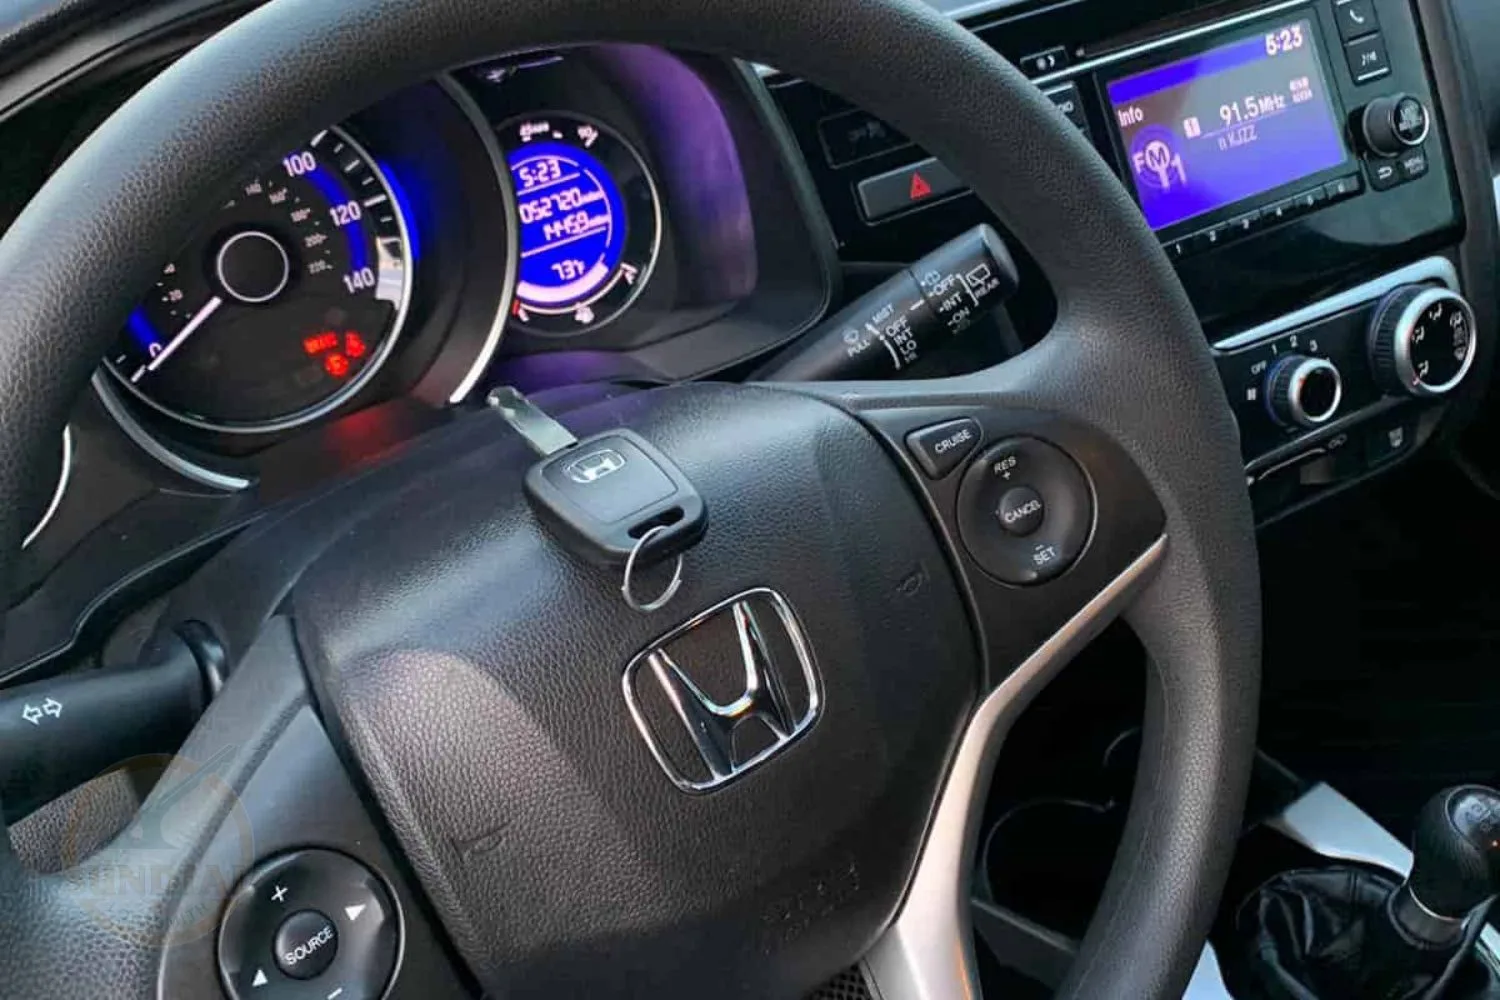 A Honda car key inserted into the ignition of a vehicle, with the steering wheel, gauge cluster, and multimedia system in the background.